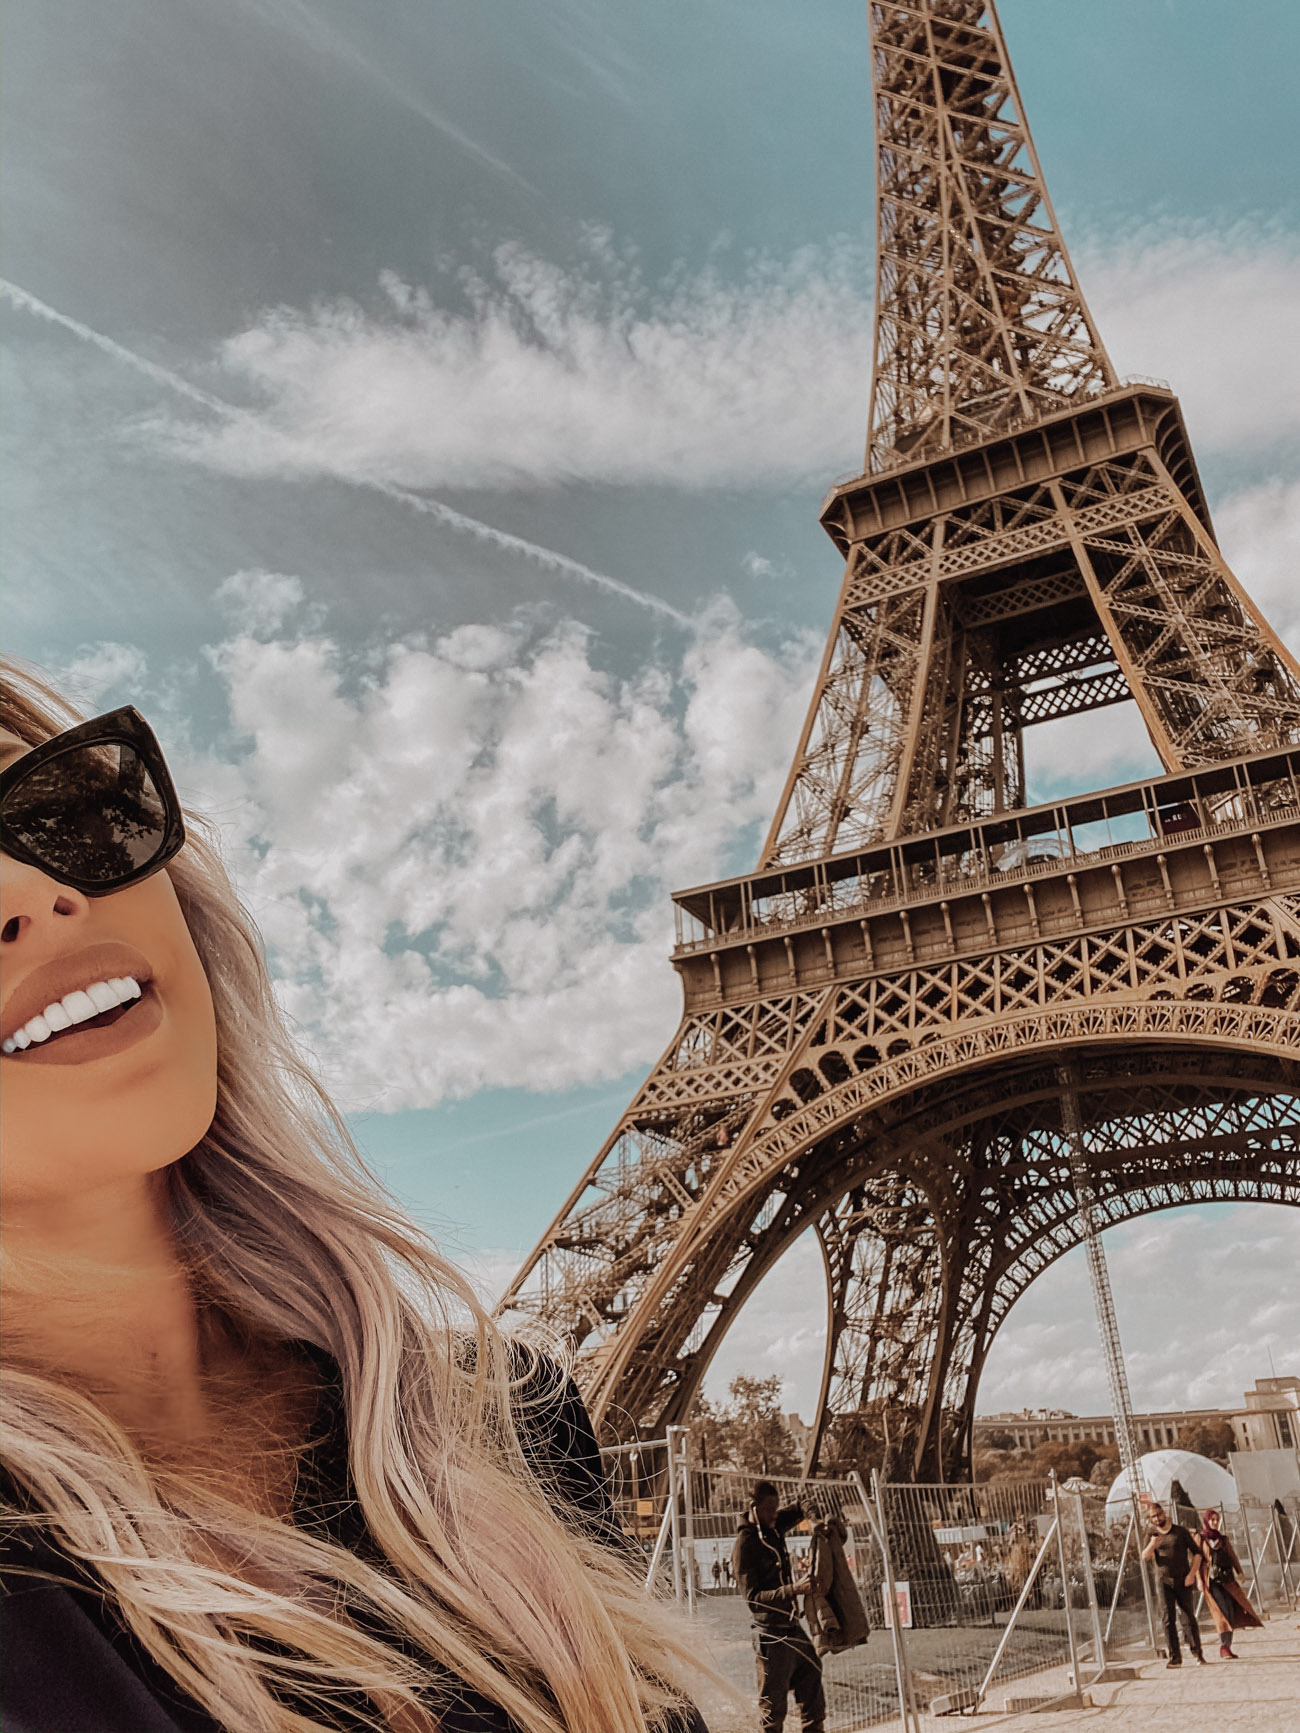 Paris, France | Eiffel Tower Views | Fun Facts About The Eiffel Tower | Blondie in the City by Hayley Larue 